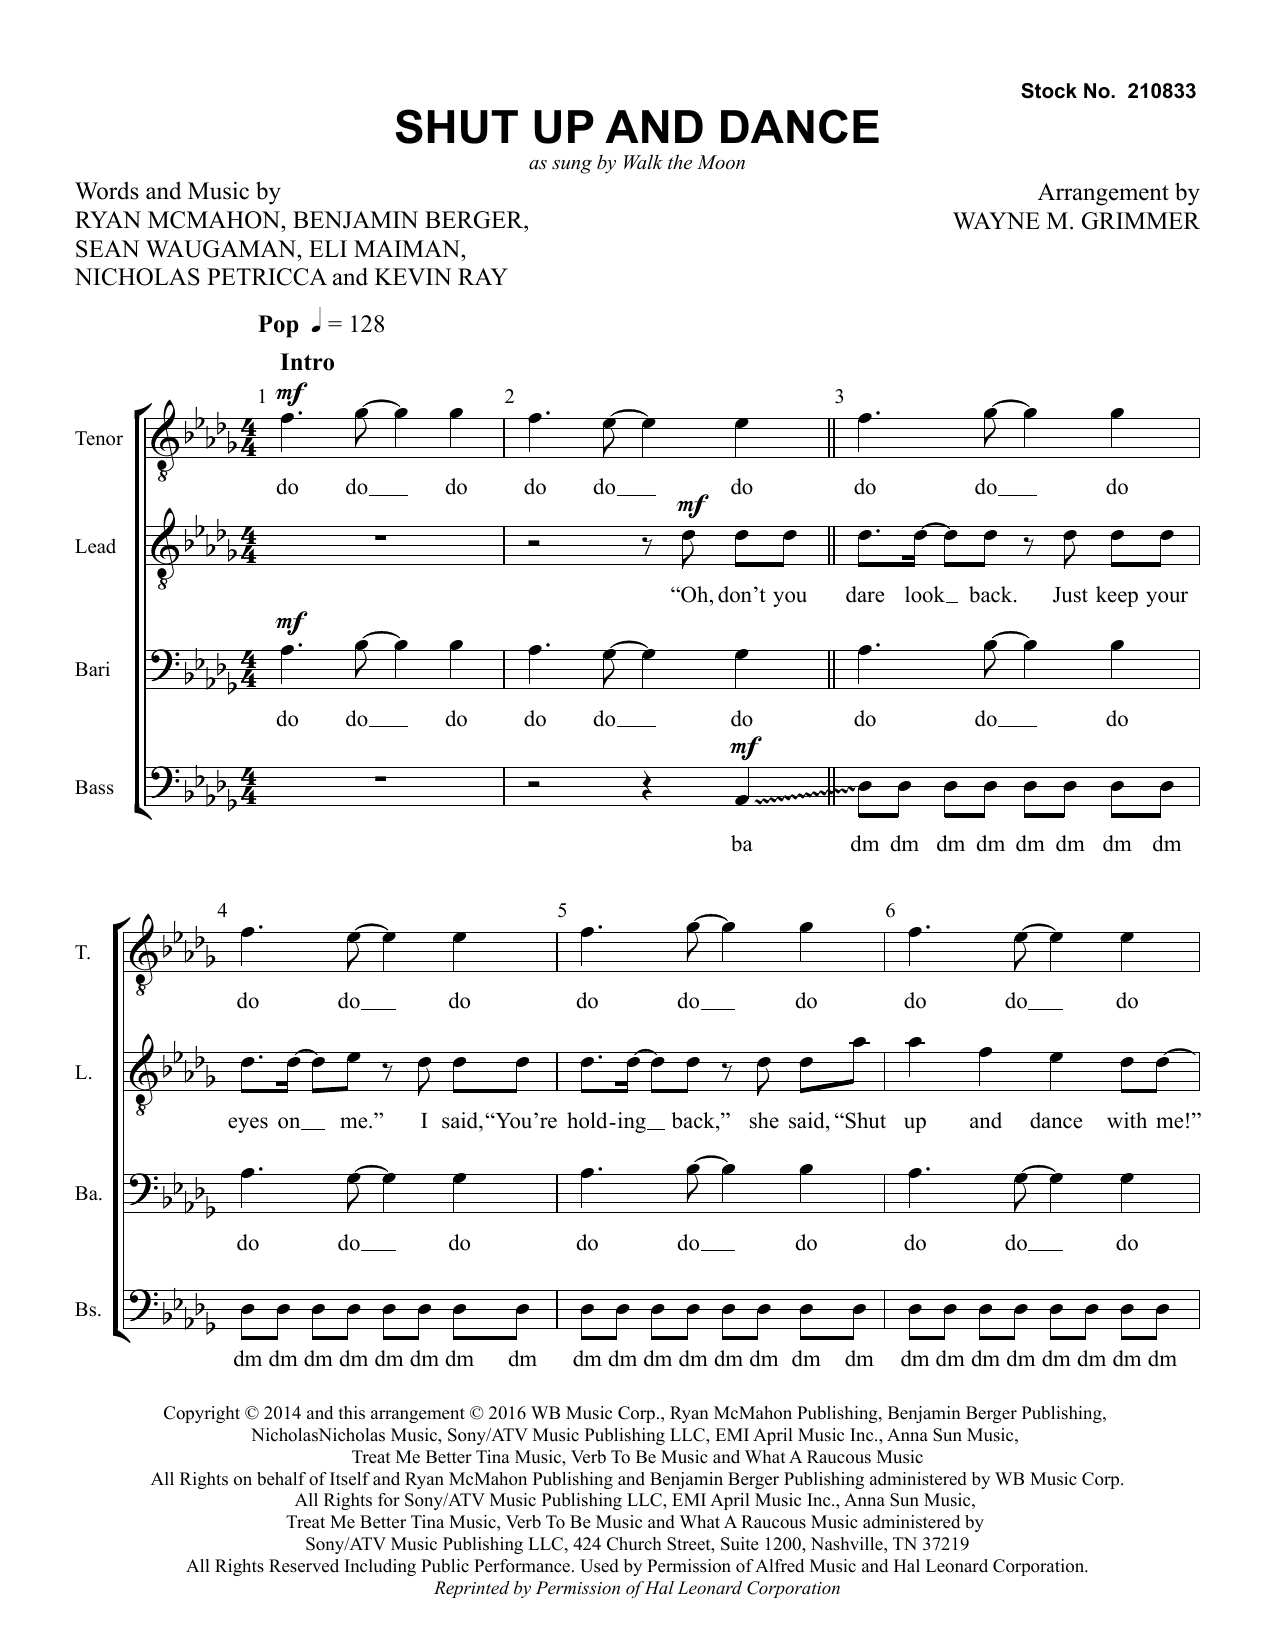 Walk The Moon Shut Up and Dance (arr. Wayne Grimmer) sheet music notes and chords. Download Printable PDF.